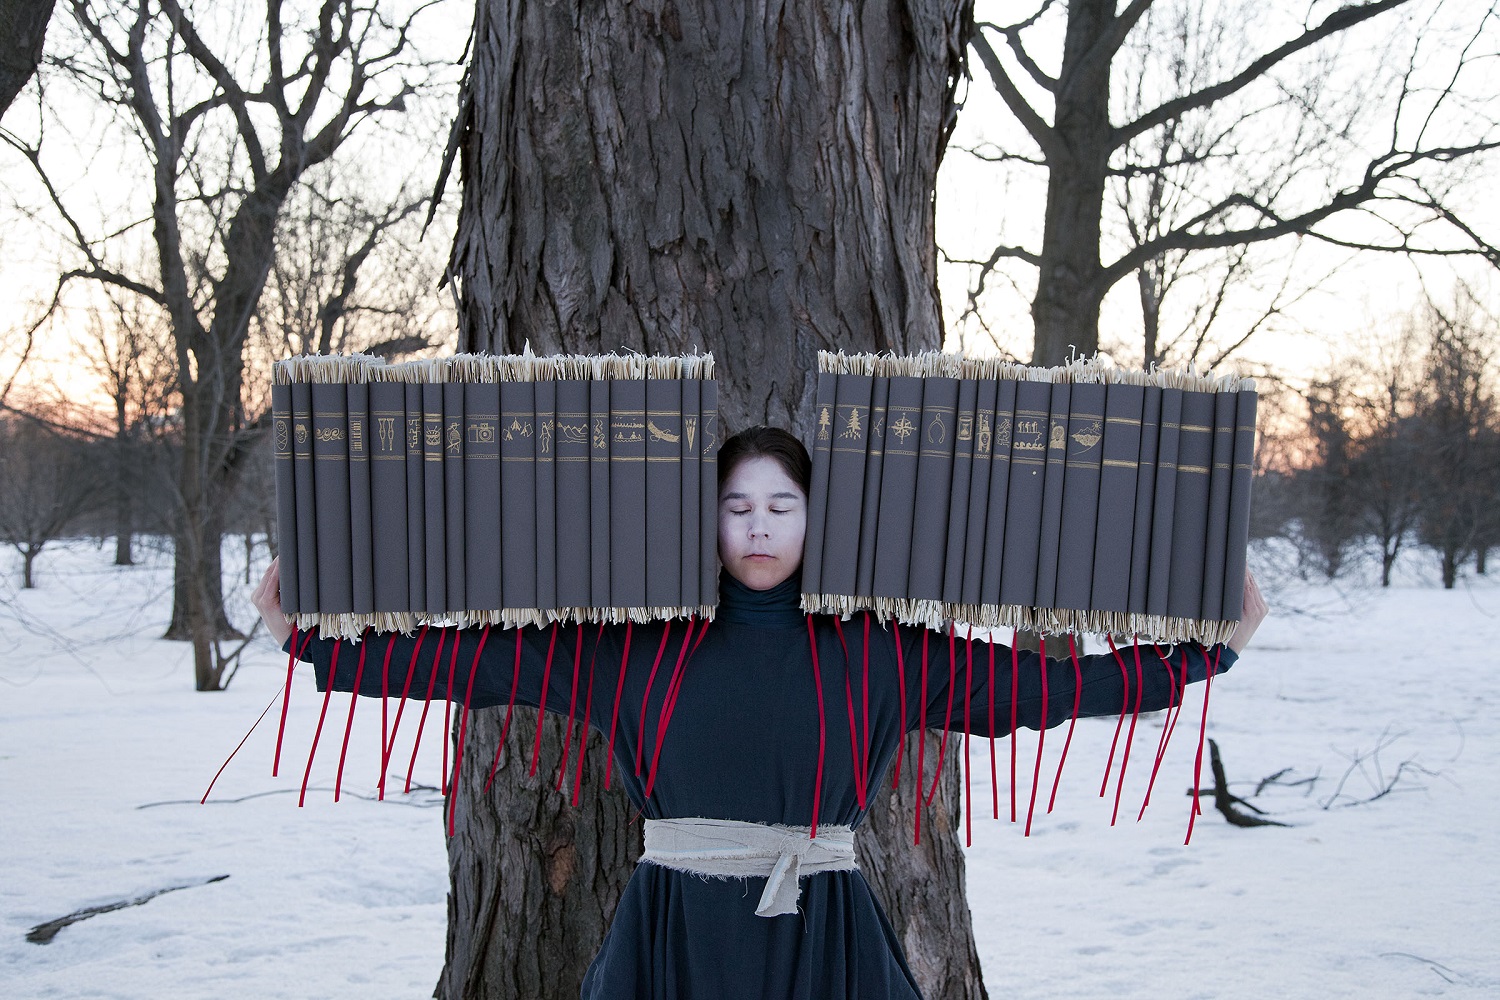 Meryl McMaster (b. 1988), "Time’s Gravity", 2015. From the series “Wanderings.” Giclée print. 30 x 45 in. 